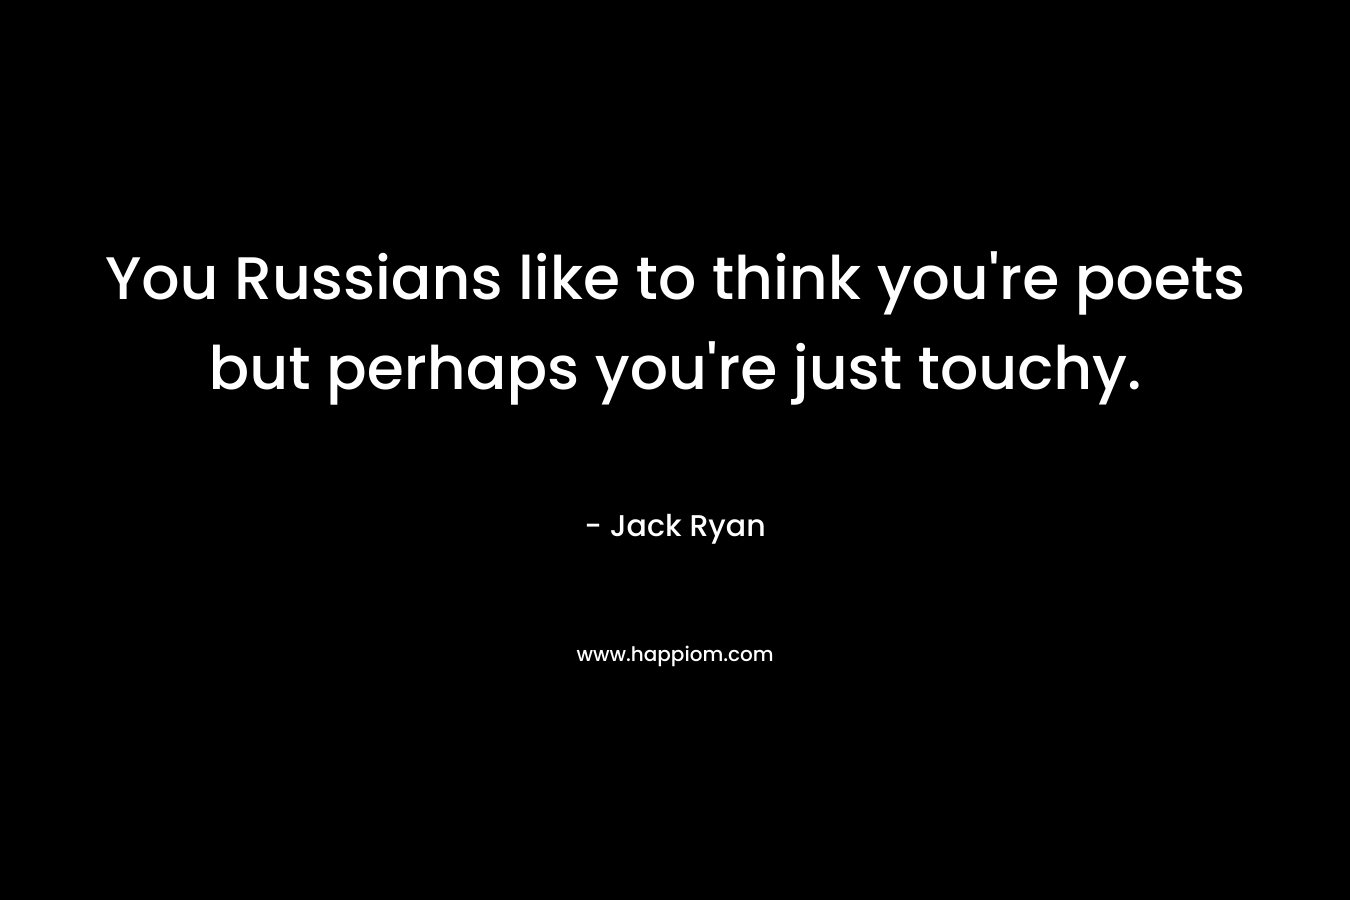 You Russians like to think you’re poets but perhaps you’re just touchy. – Jack Ryan